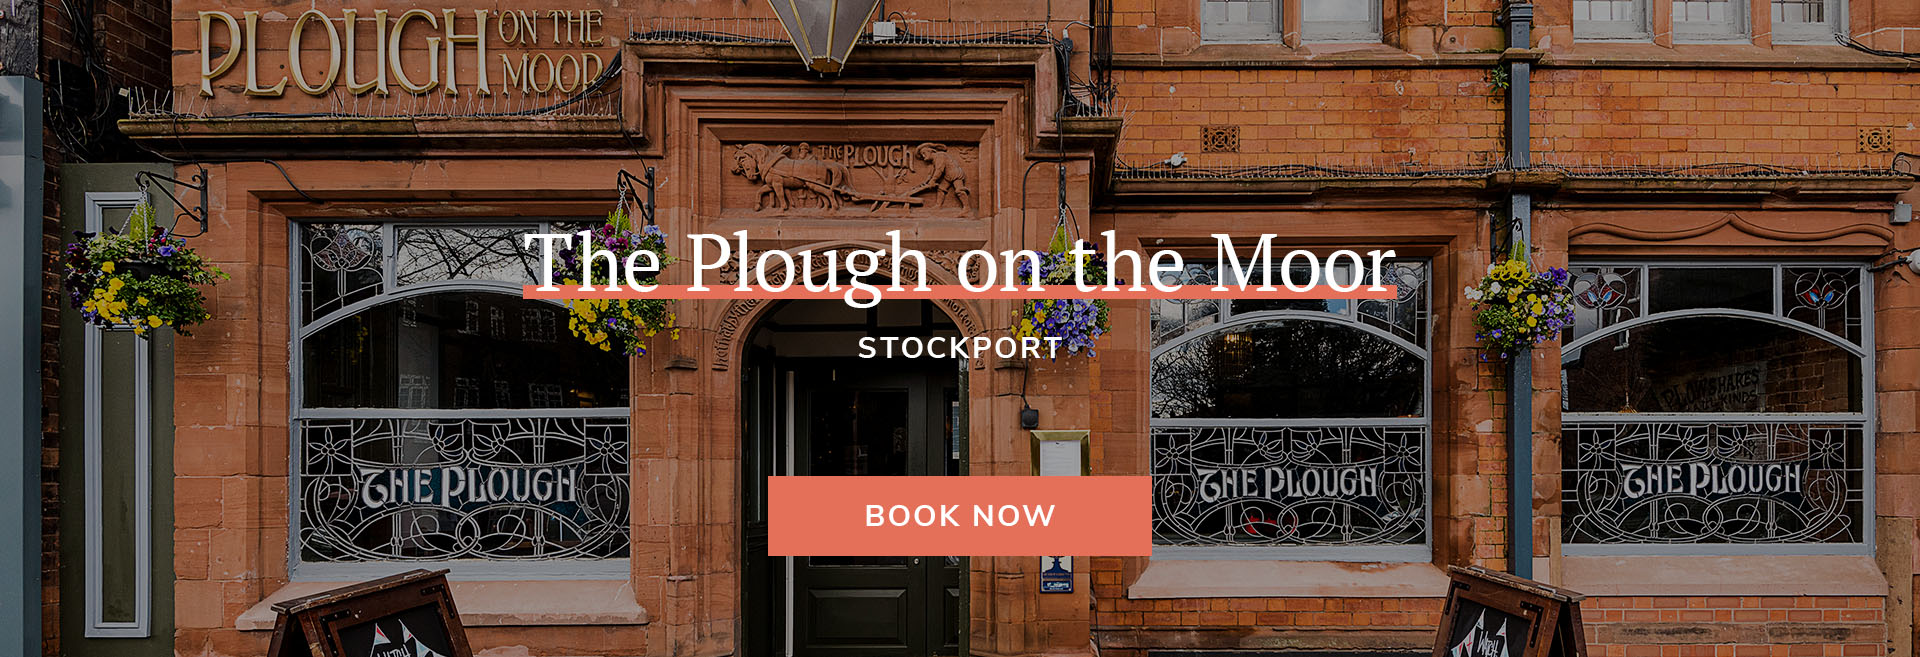 The Plough on the Moor Banner 1